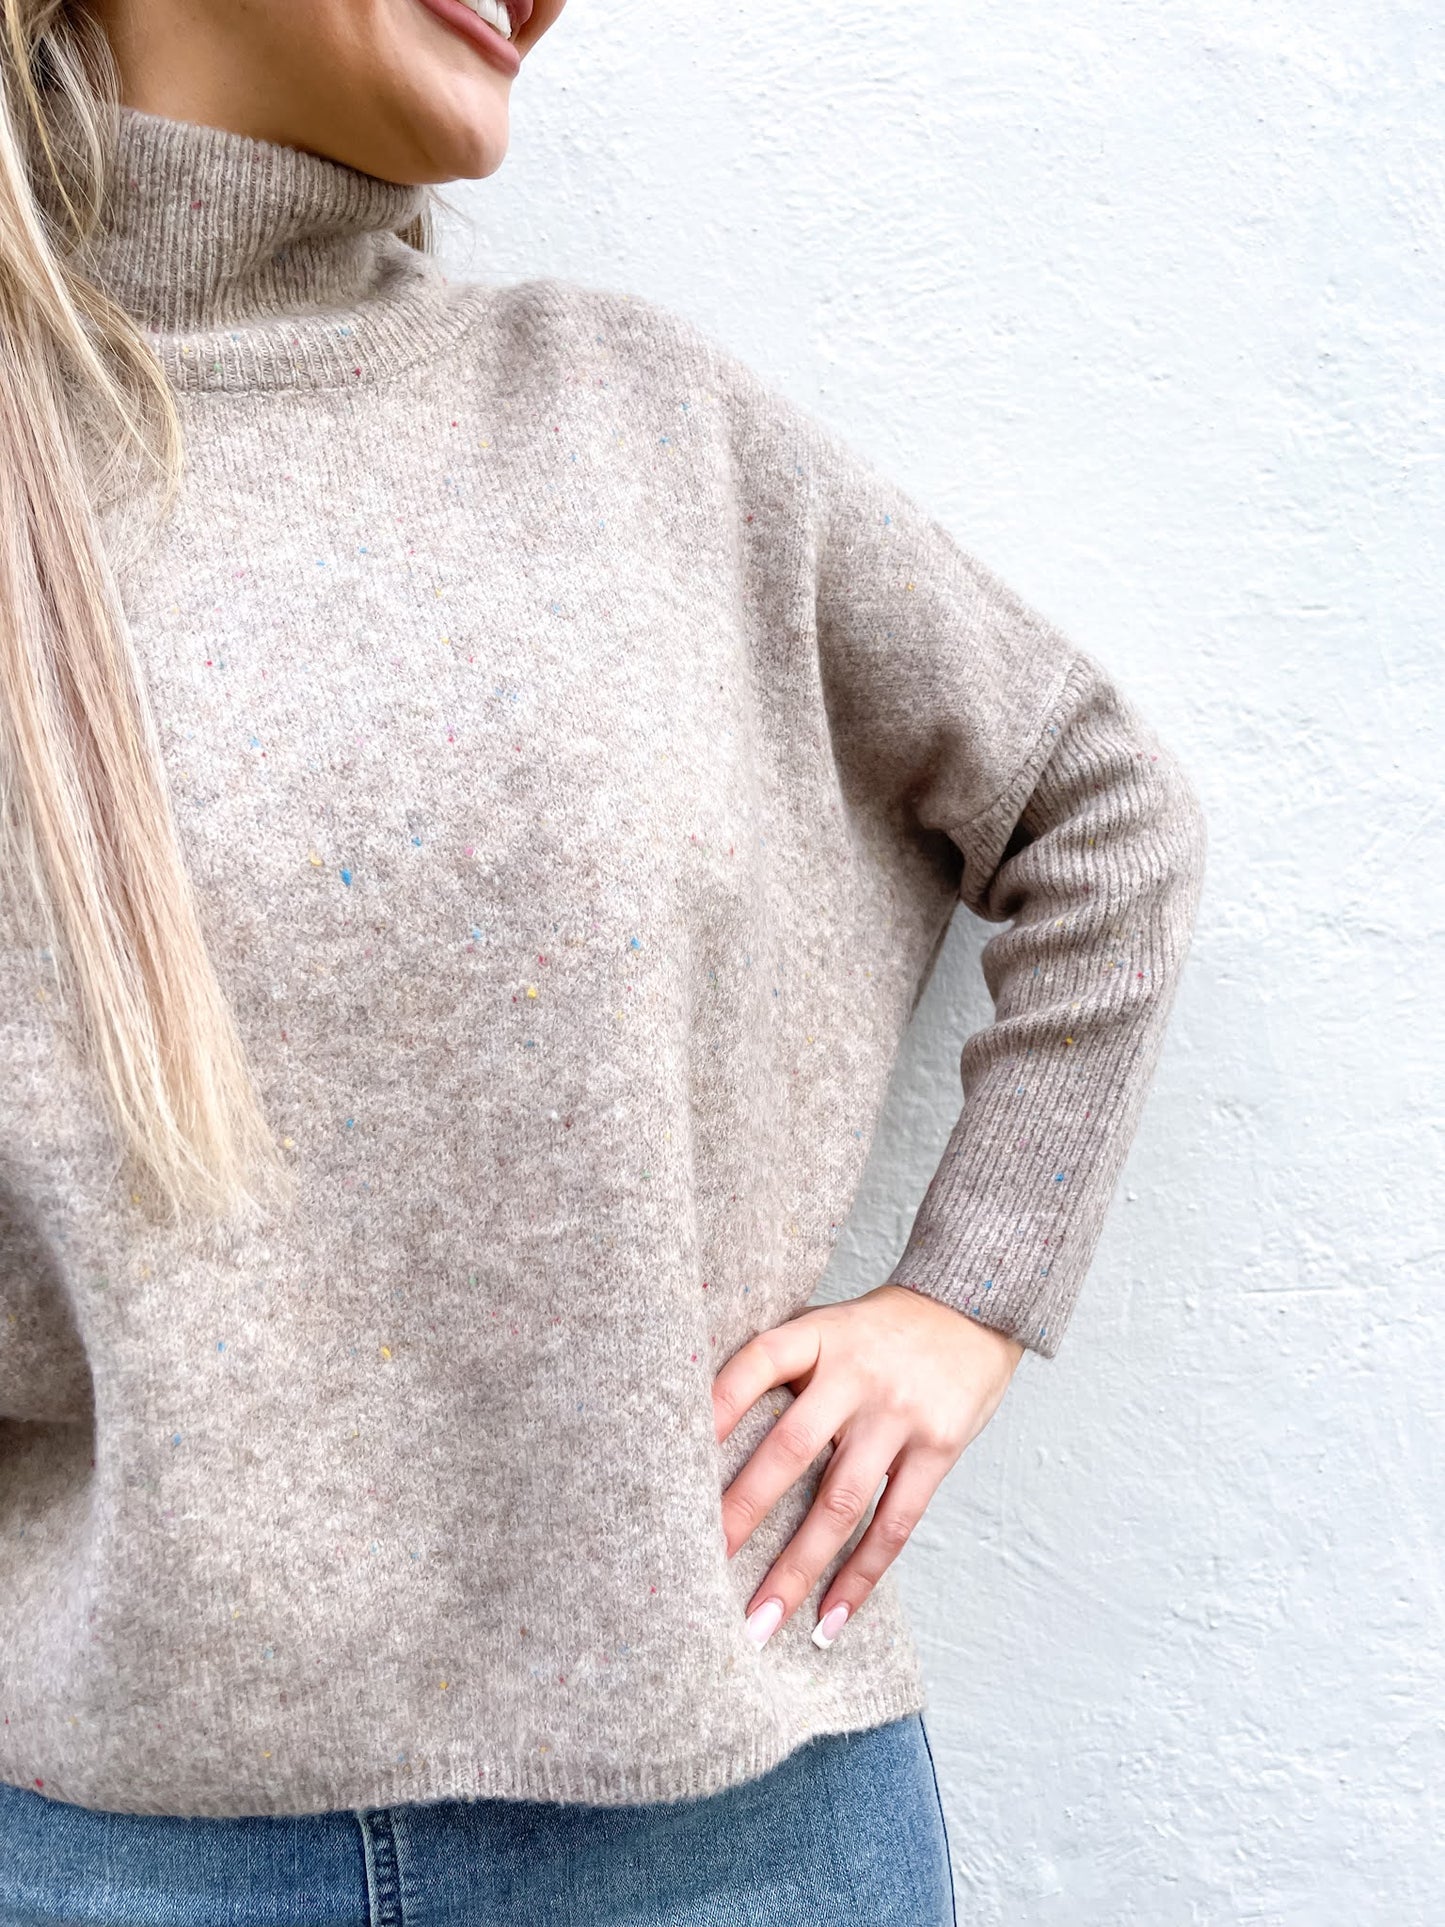 OSFM Wool Mix Turtle Neck Jumper in Mocha by Fria the label